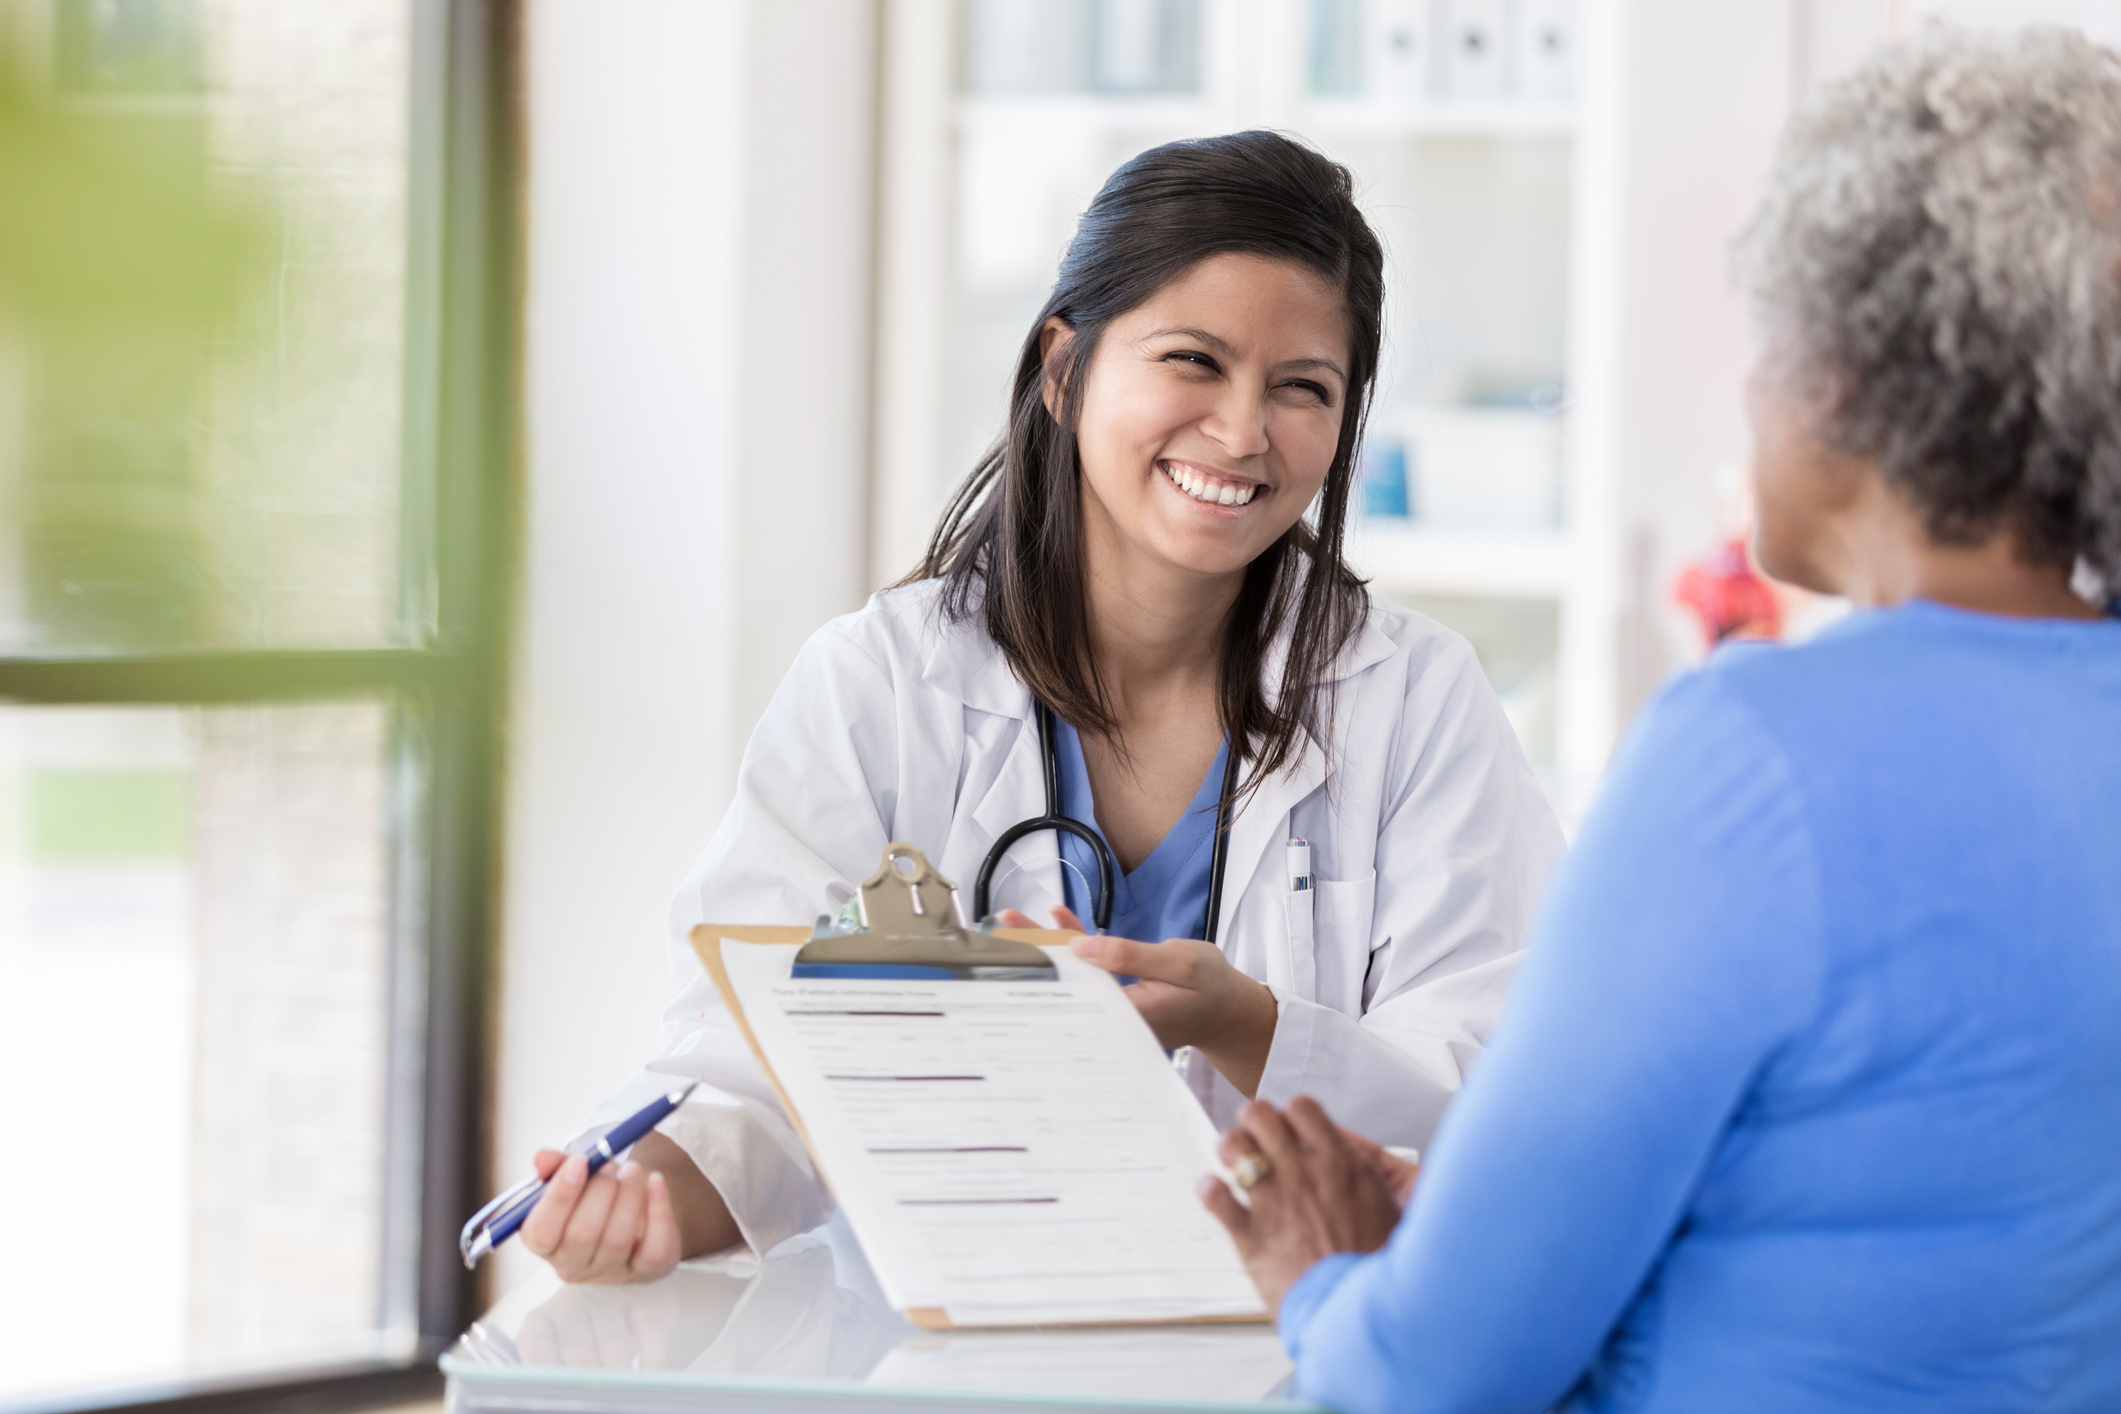 Female doctor laughs with patient during paperwork